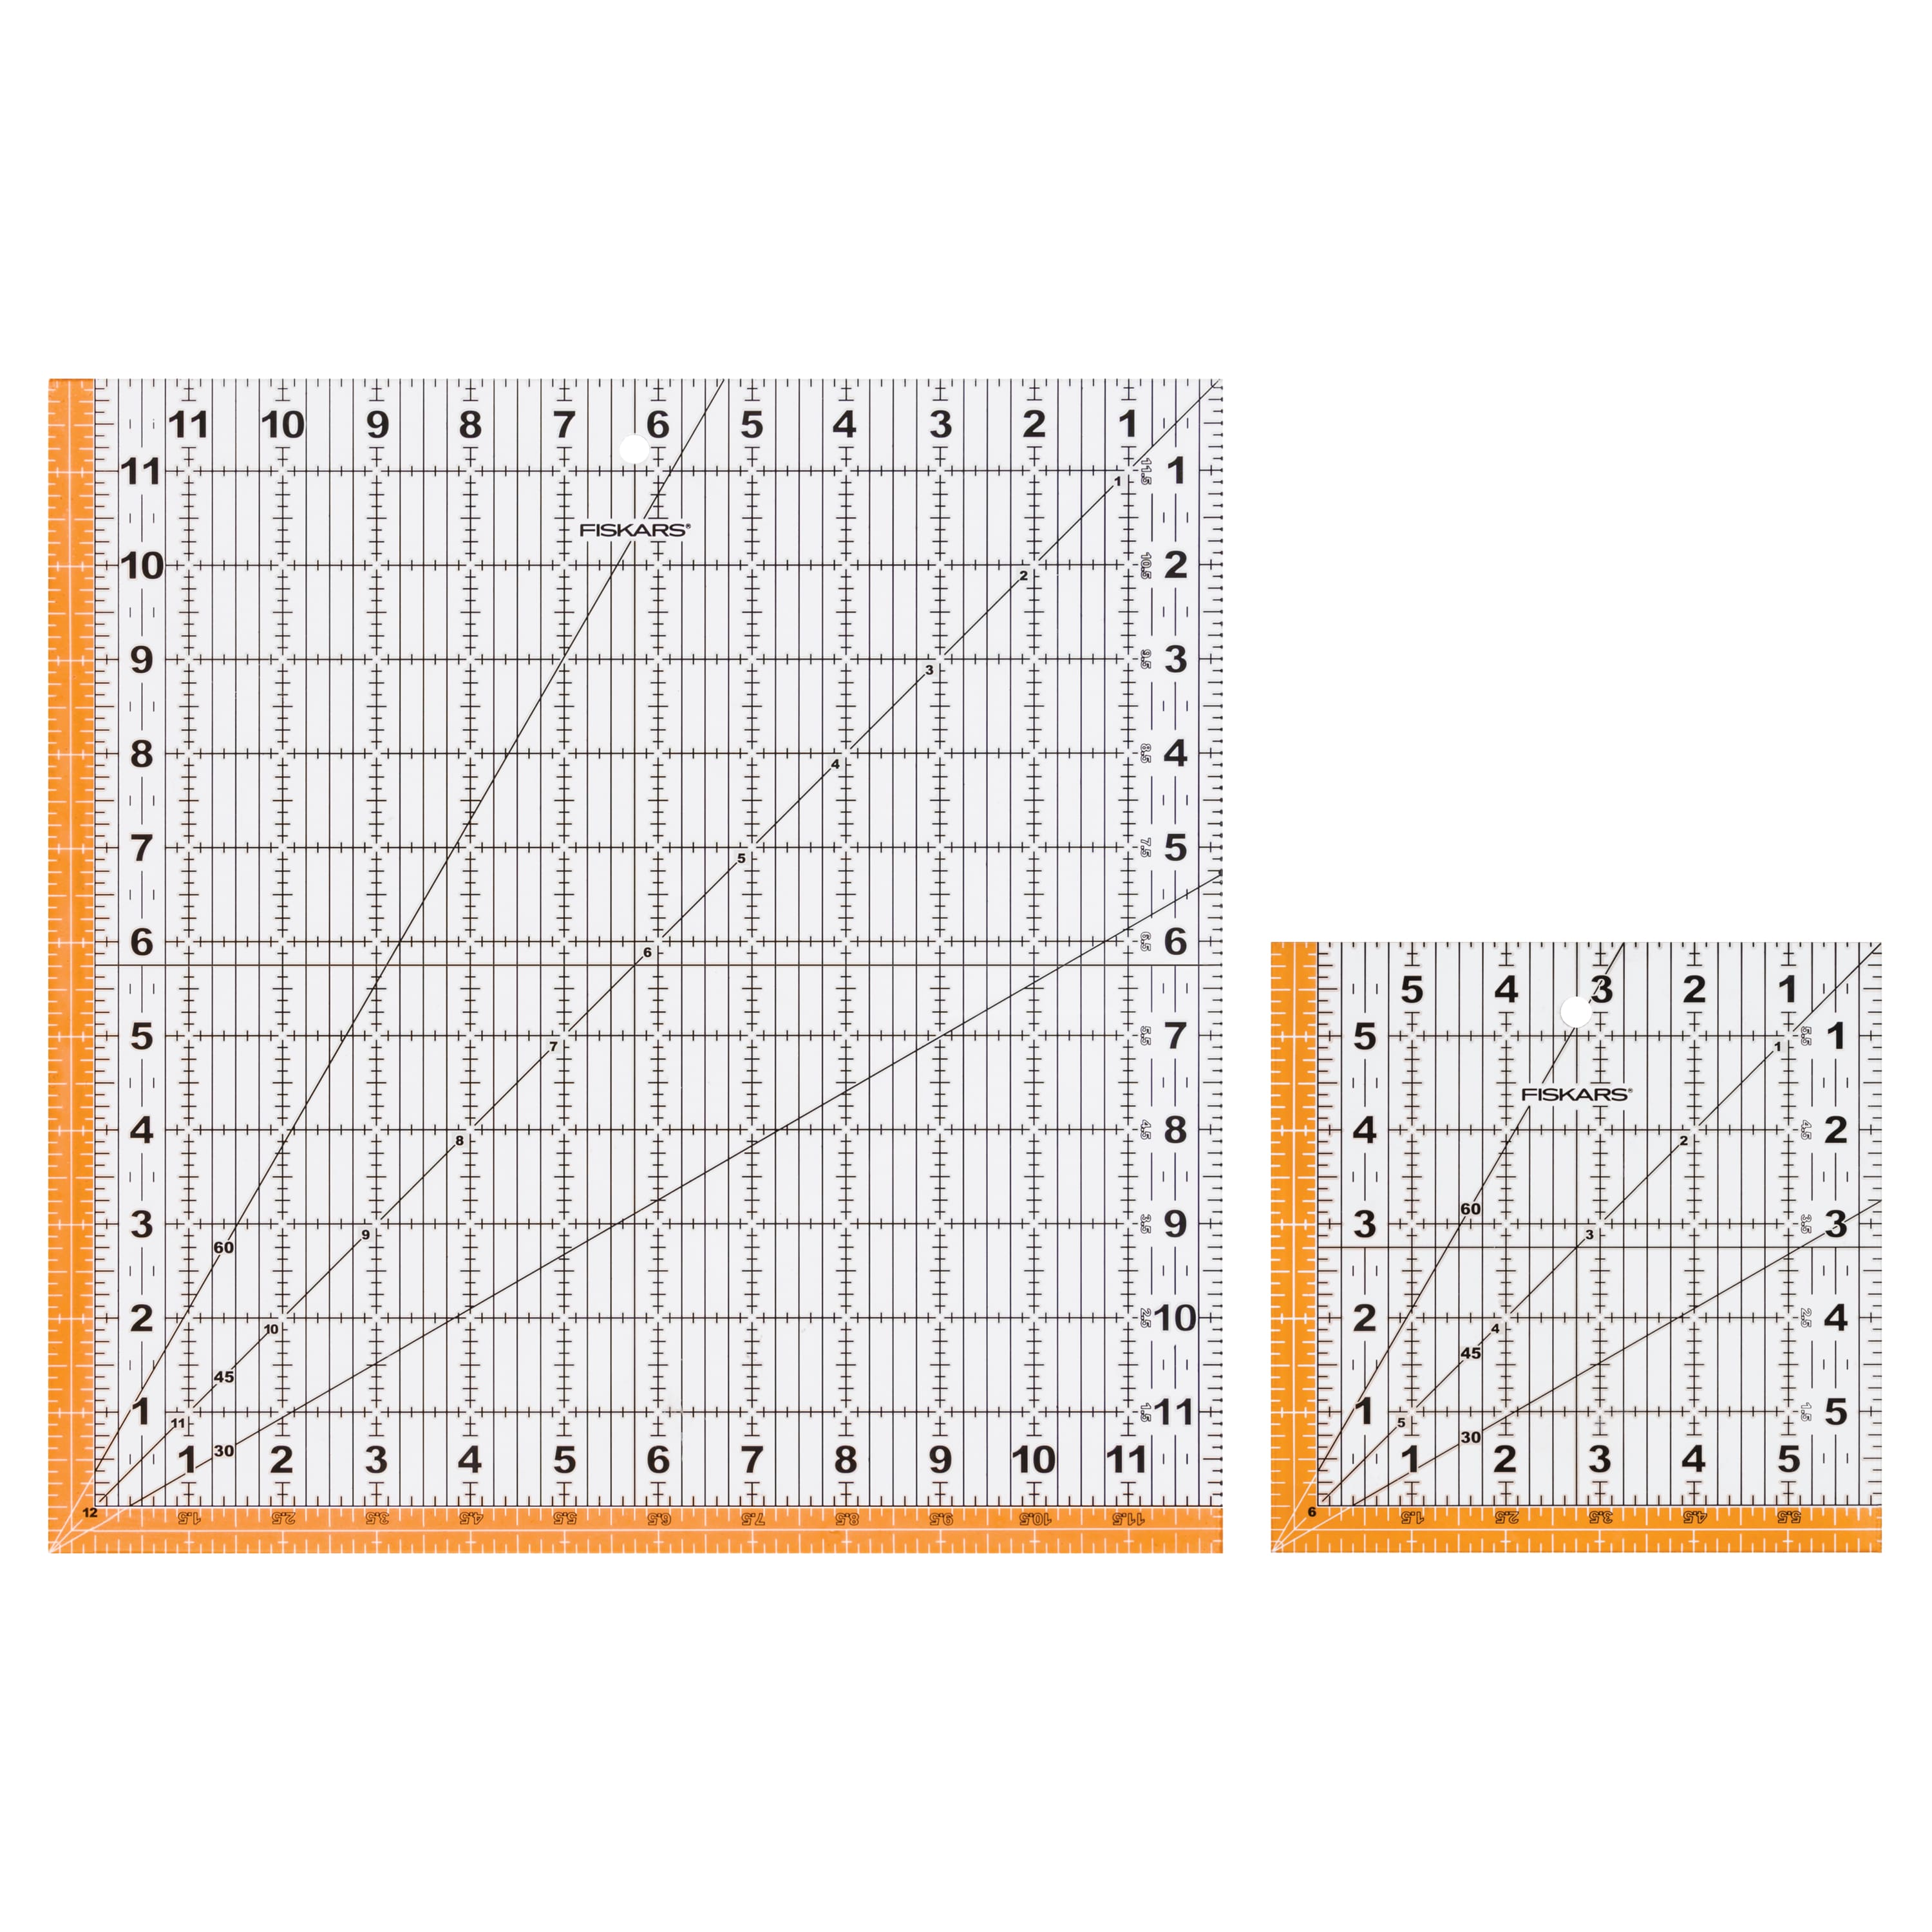 Sewing Rulers, Acrylic Quilting Rulers, Square Quilting Rulers and  Templates, Fabric Ruler, Sewing Rulers and Guides for Fabric, Square Rulers